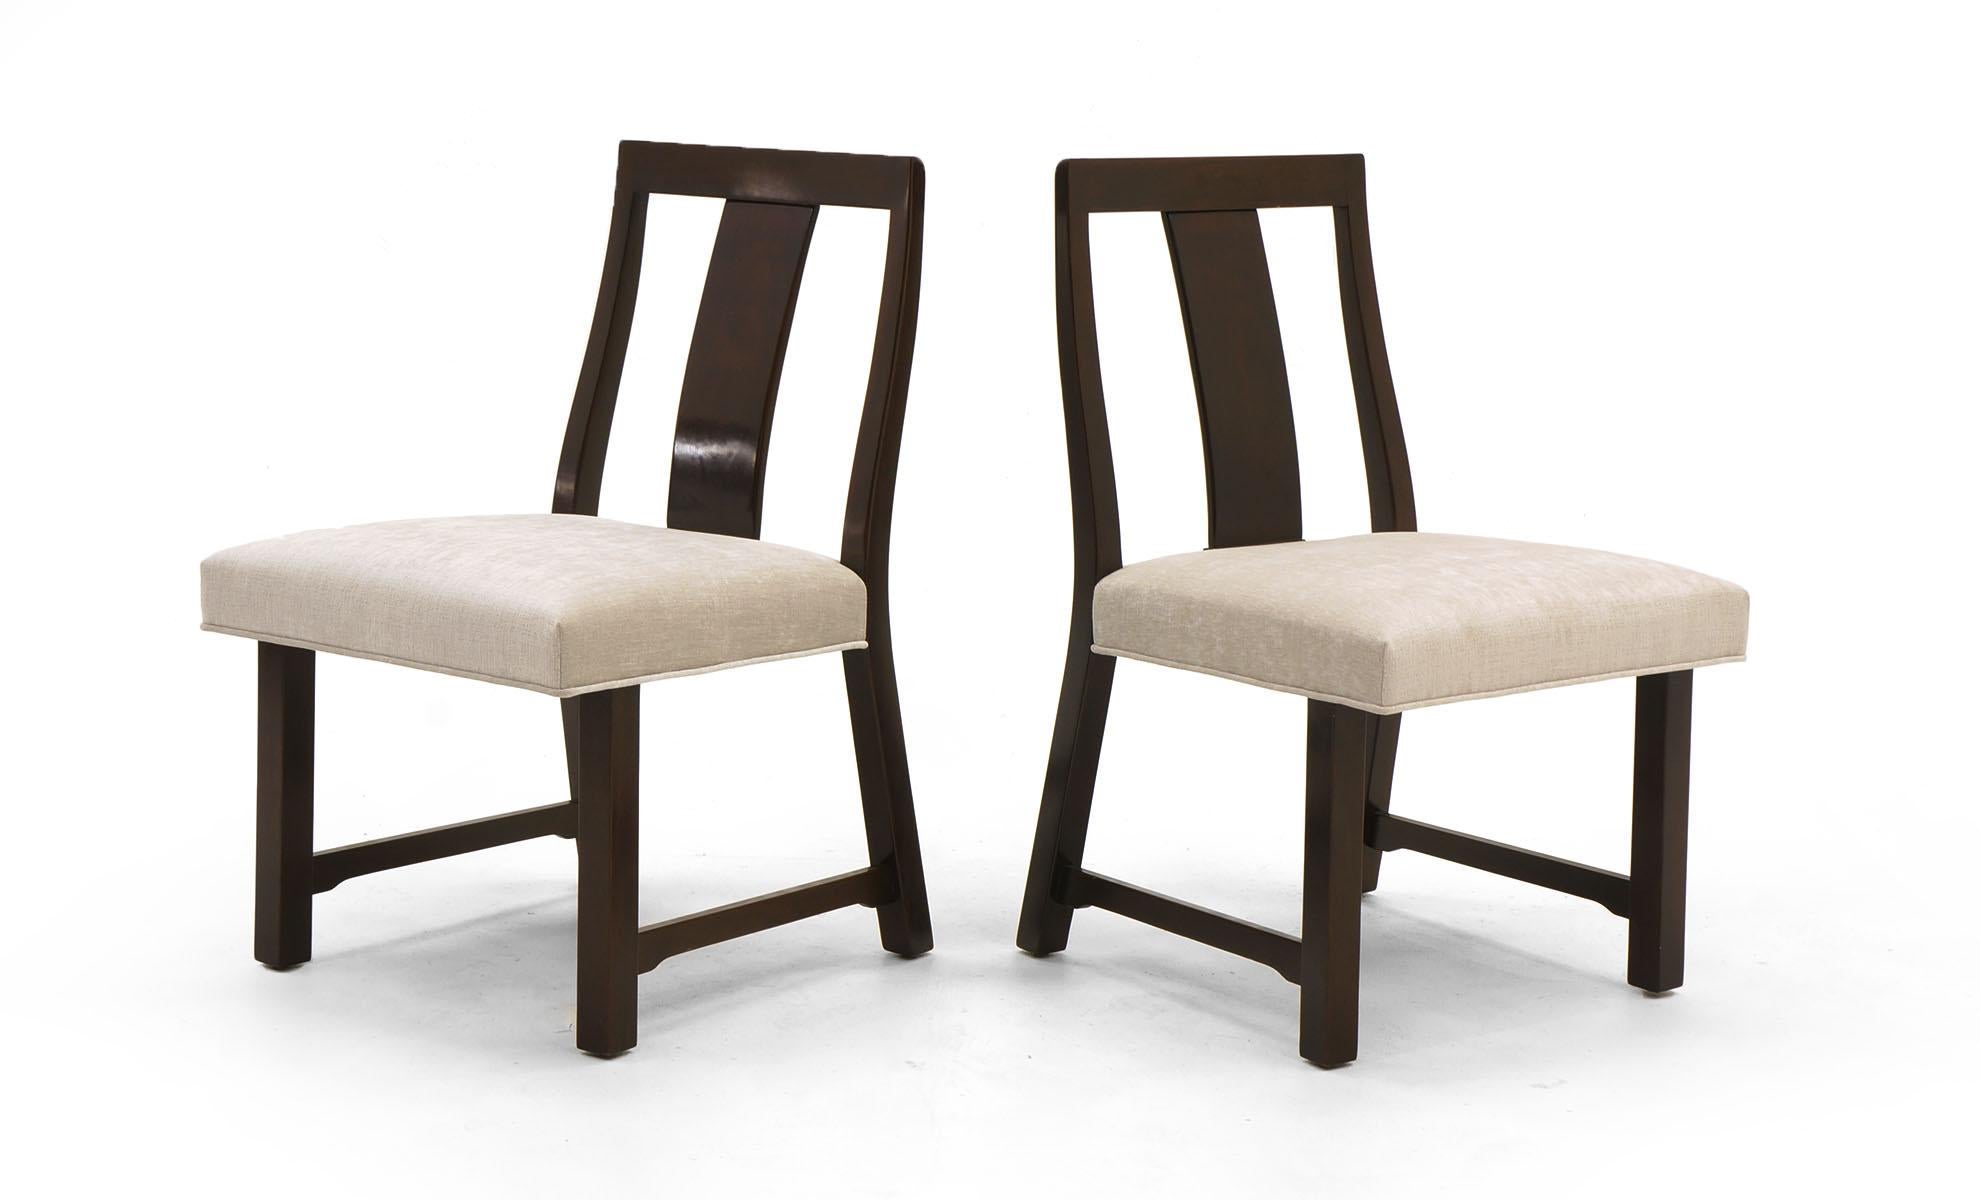 Mid-20th Century Set of Eight Dining Chairs by Edward Wormley for Dunbar, New Knoll Upholstery